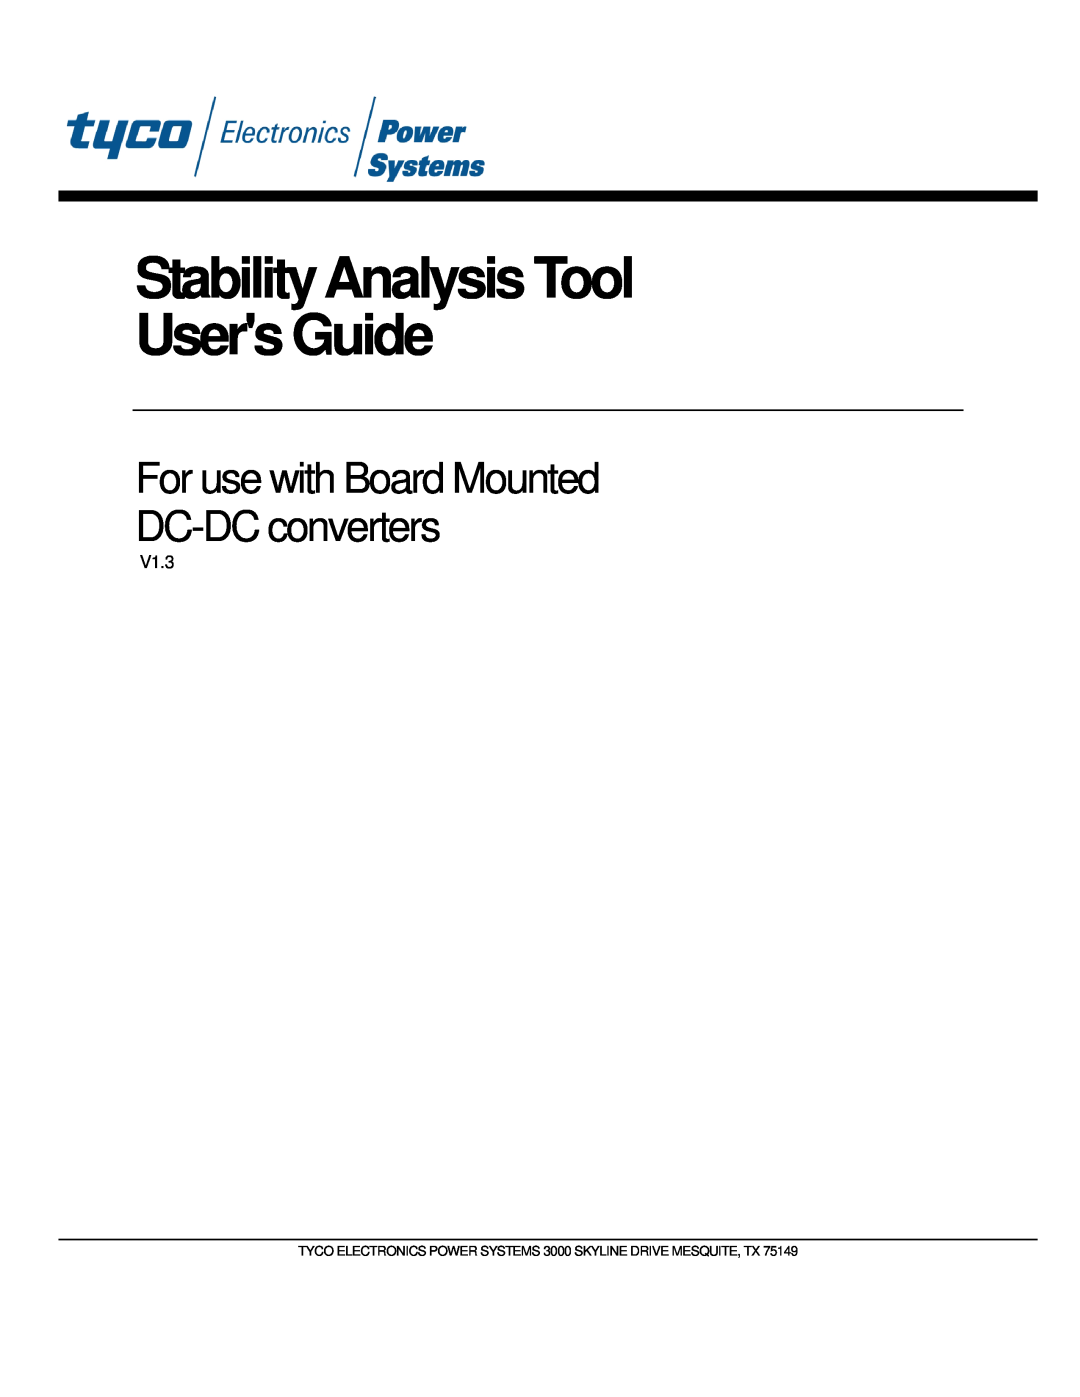 Tyco TX 75149 manual StabilityAnalysis Tool Users Guide, For use with Board Mounted DC-DC converters 